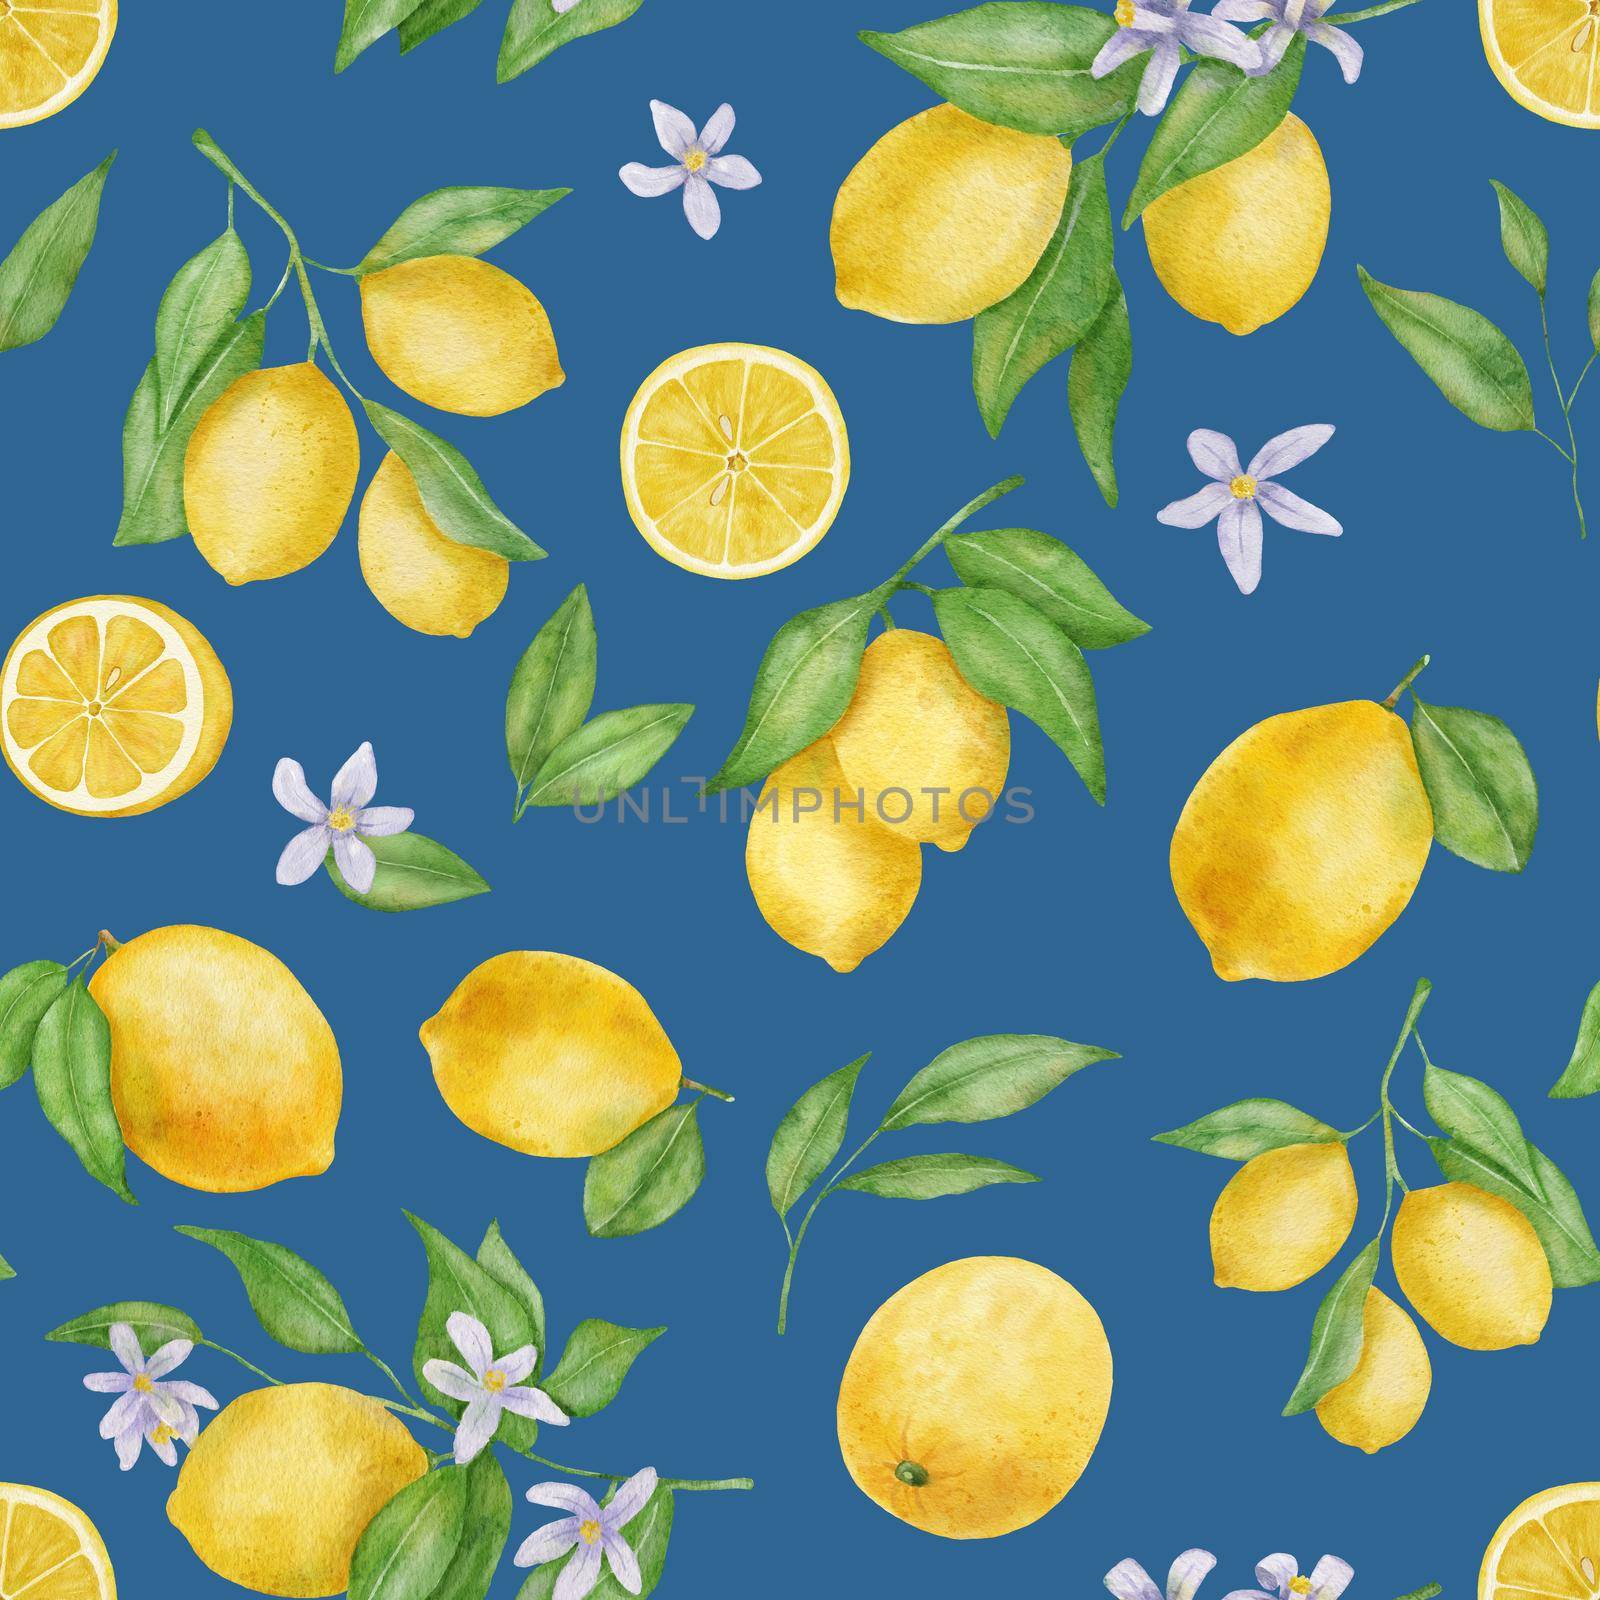 Lemon fruits with leaves and flower watercolor seamless pattern on blue background by ElenaPlatova